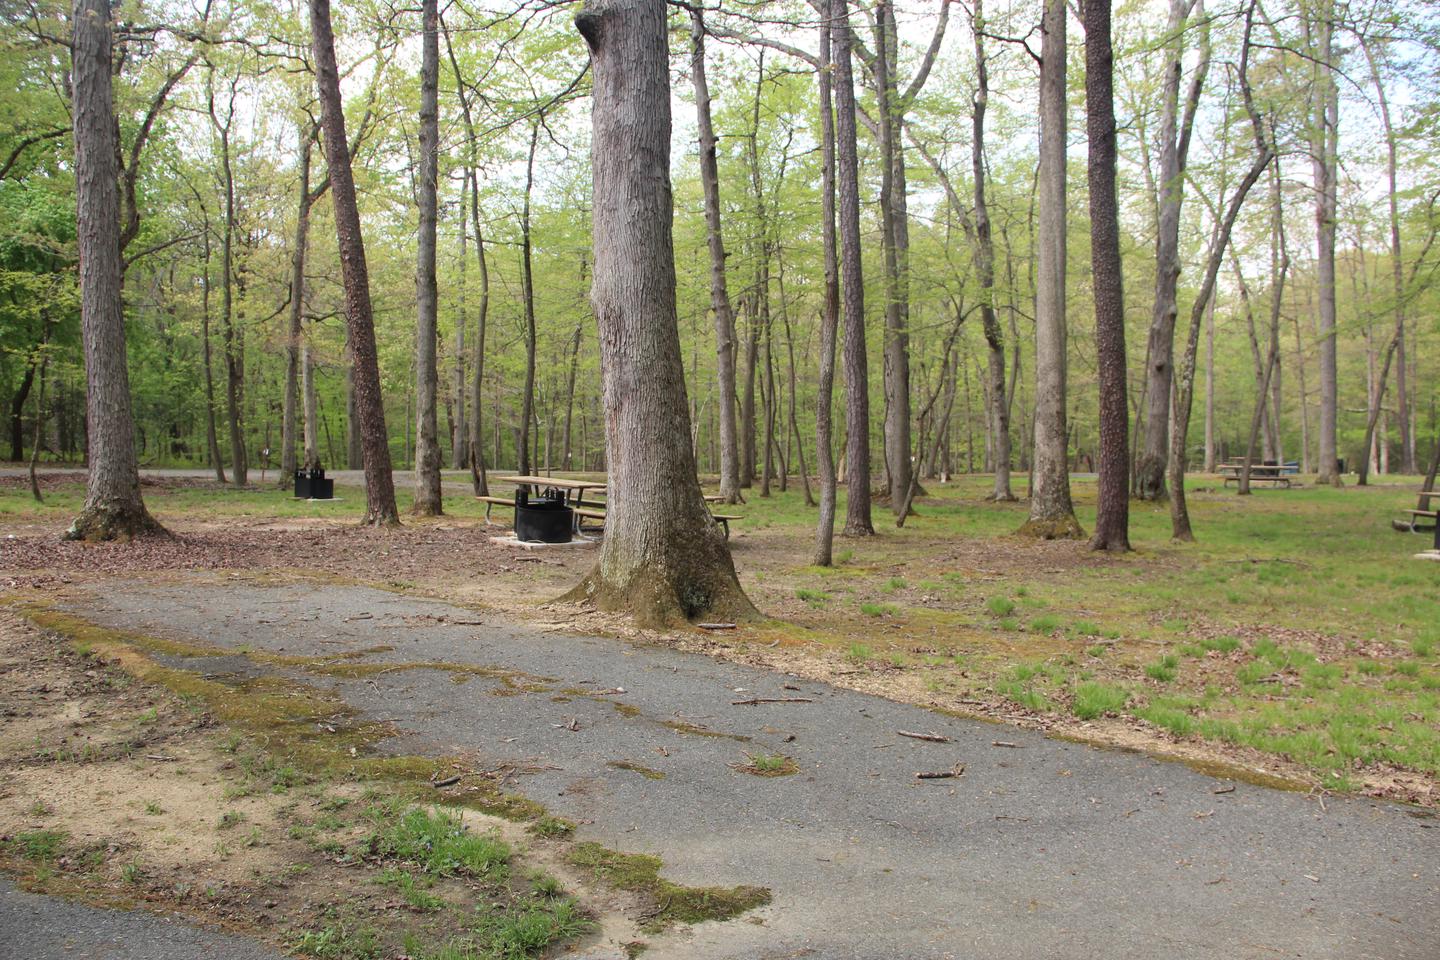 C88 C Loop of the Greenbelt Park Md campgroundC88 C Loop of the Greenbelt Park Maryland campground (former site 91)